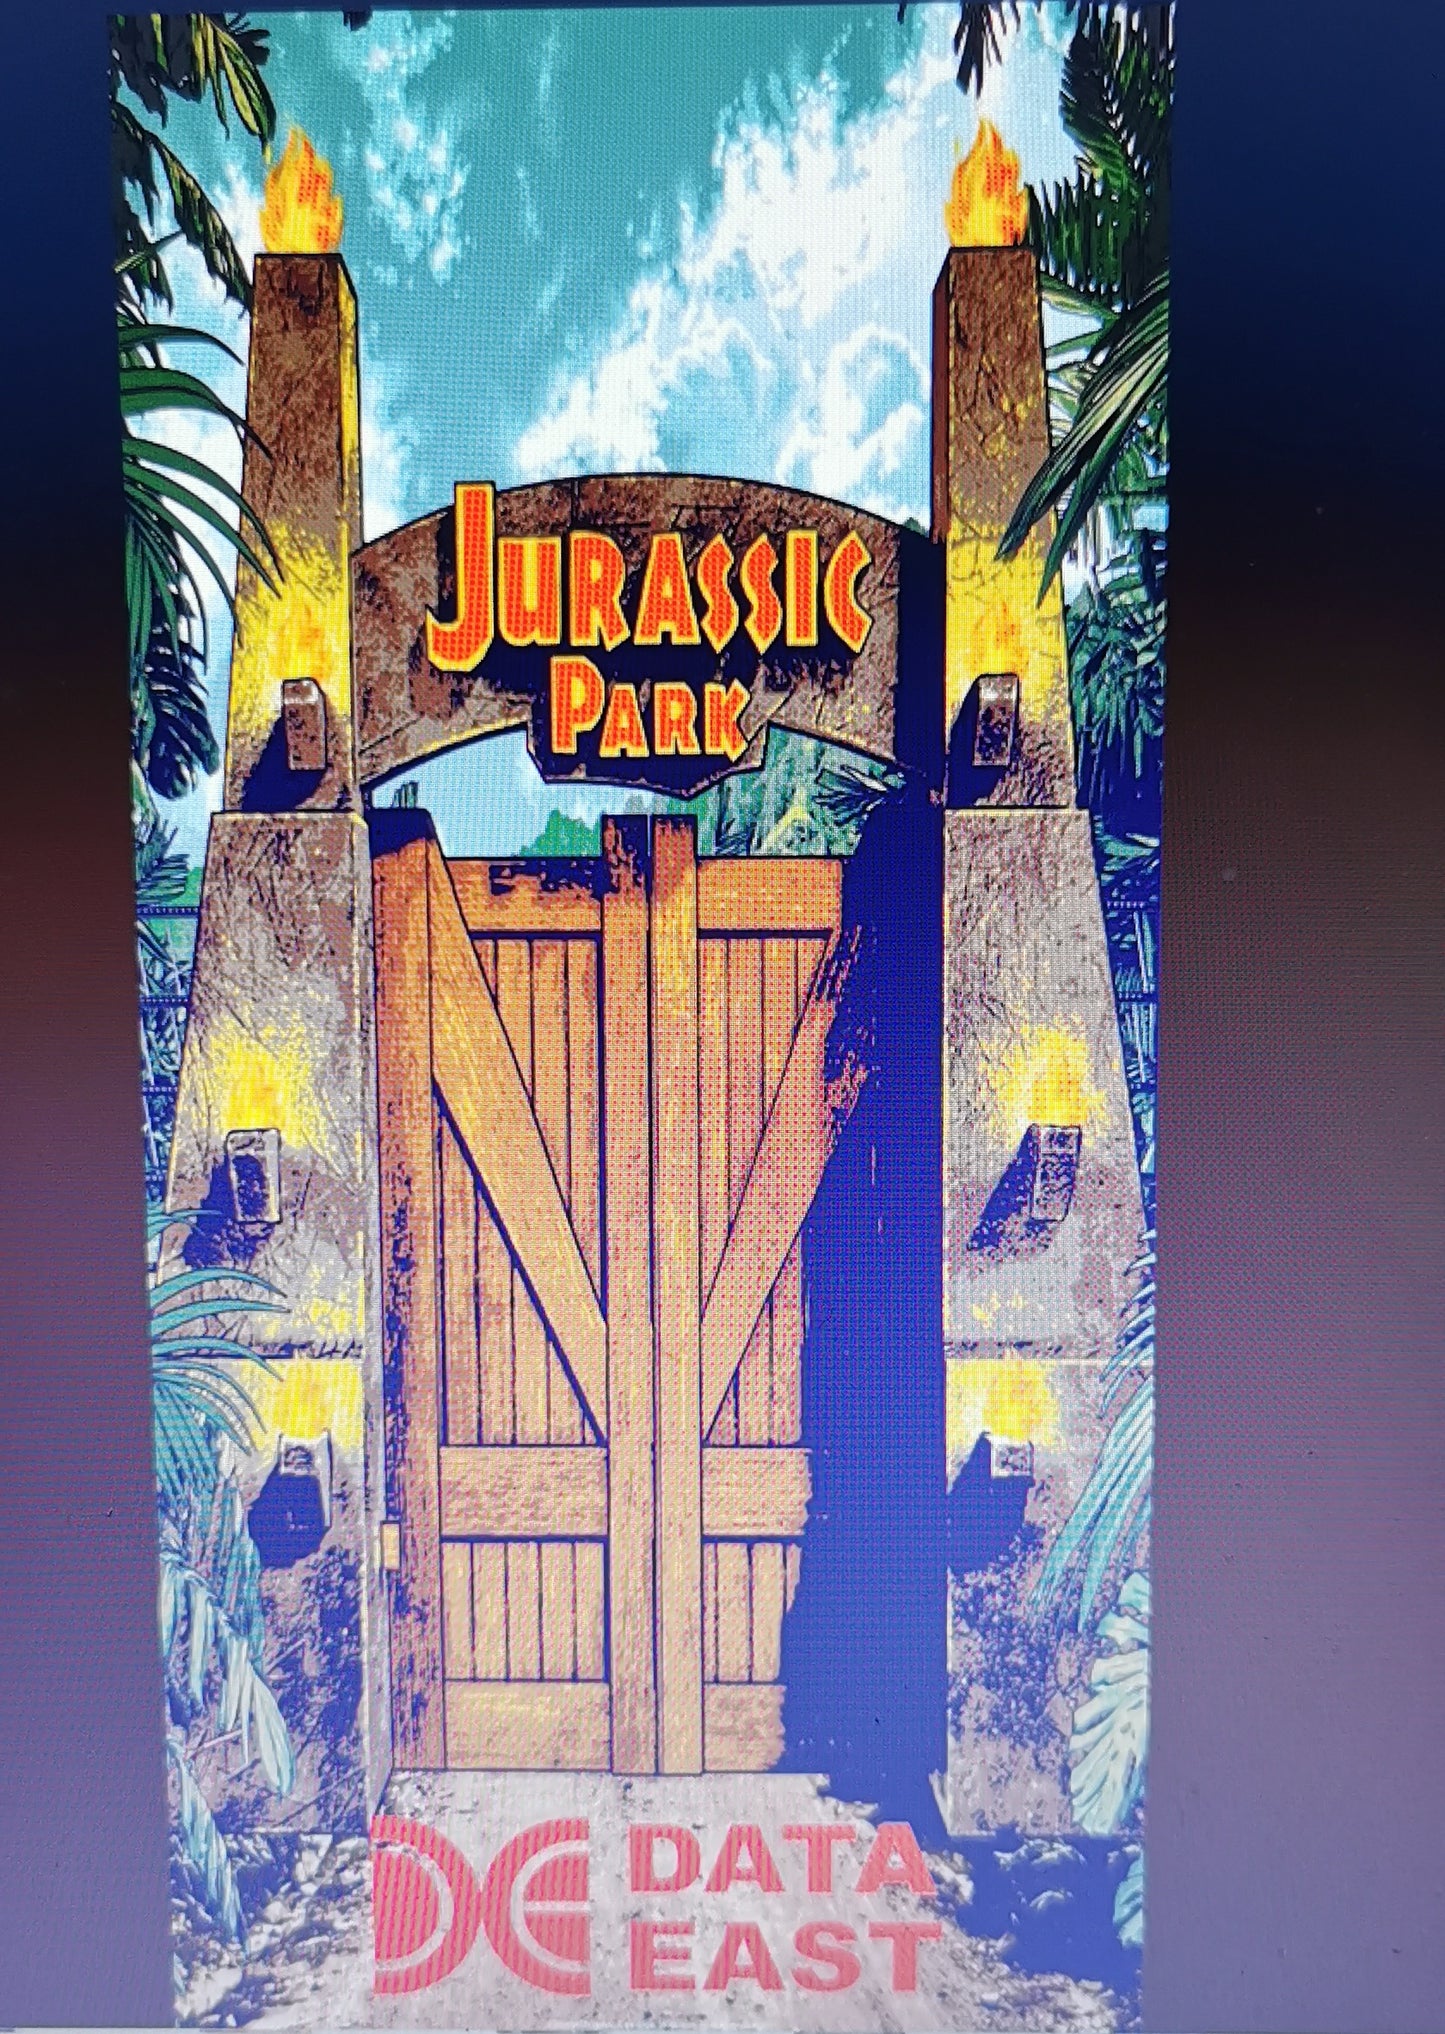 Pinball cover protection glass jurassic park data East